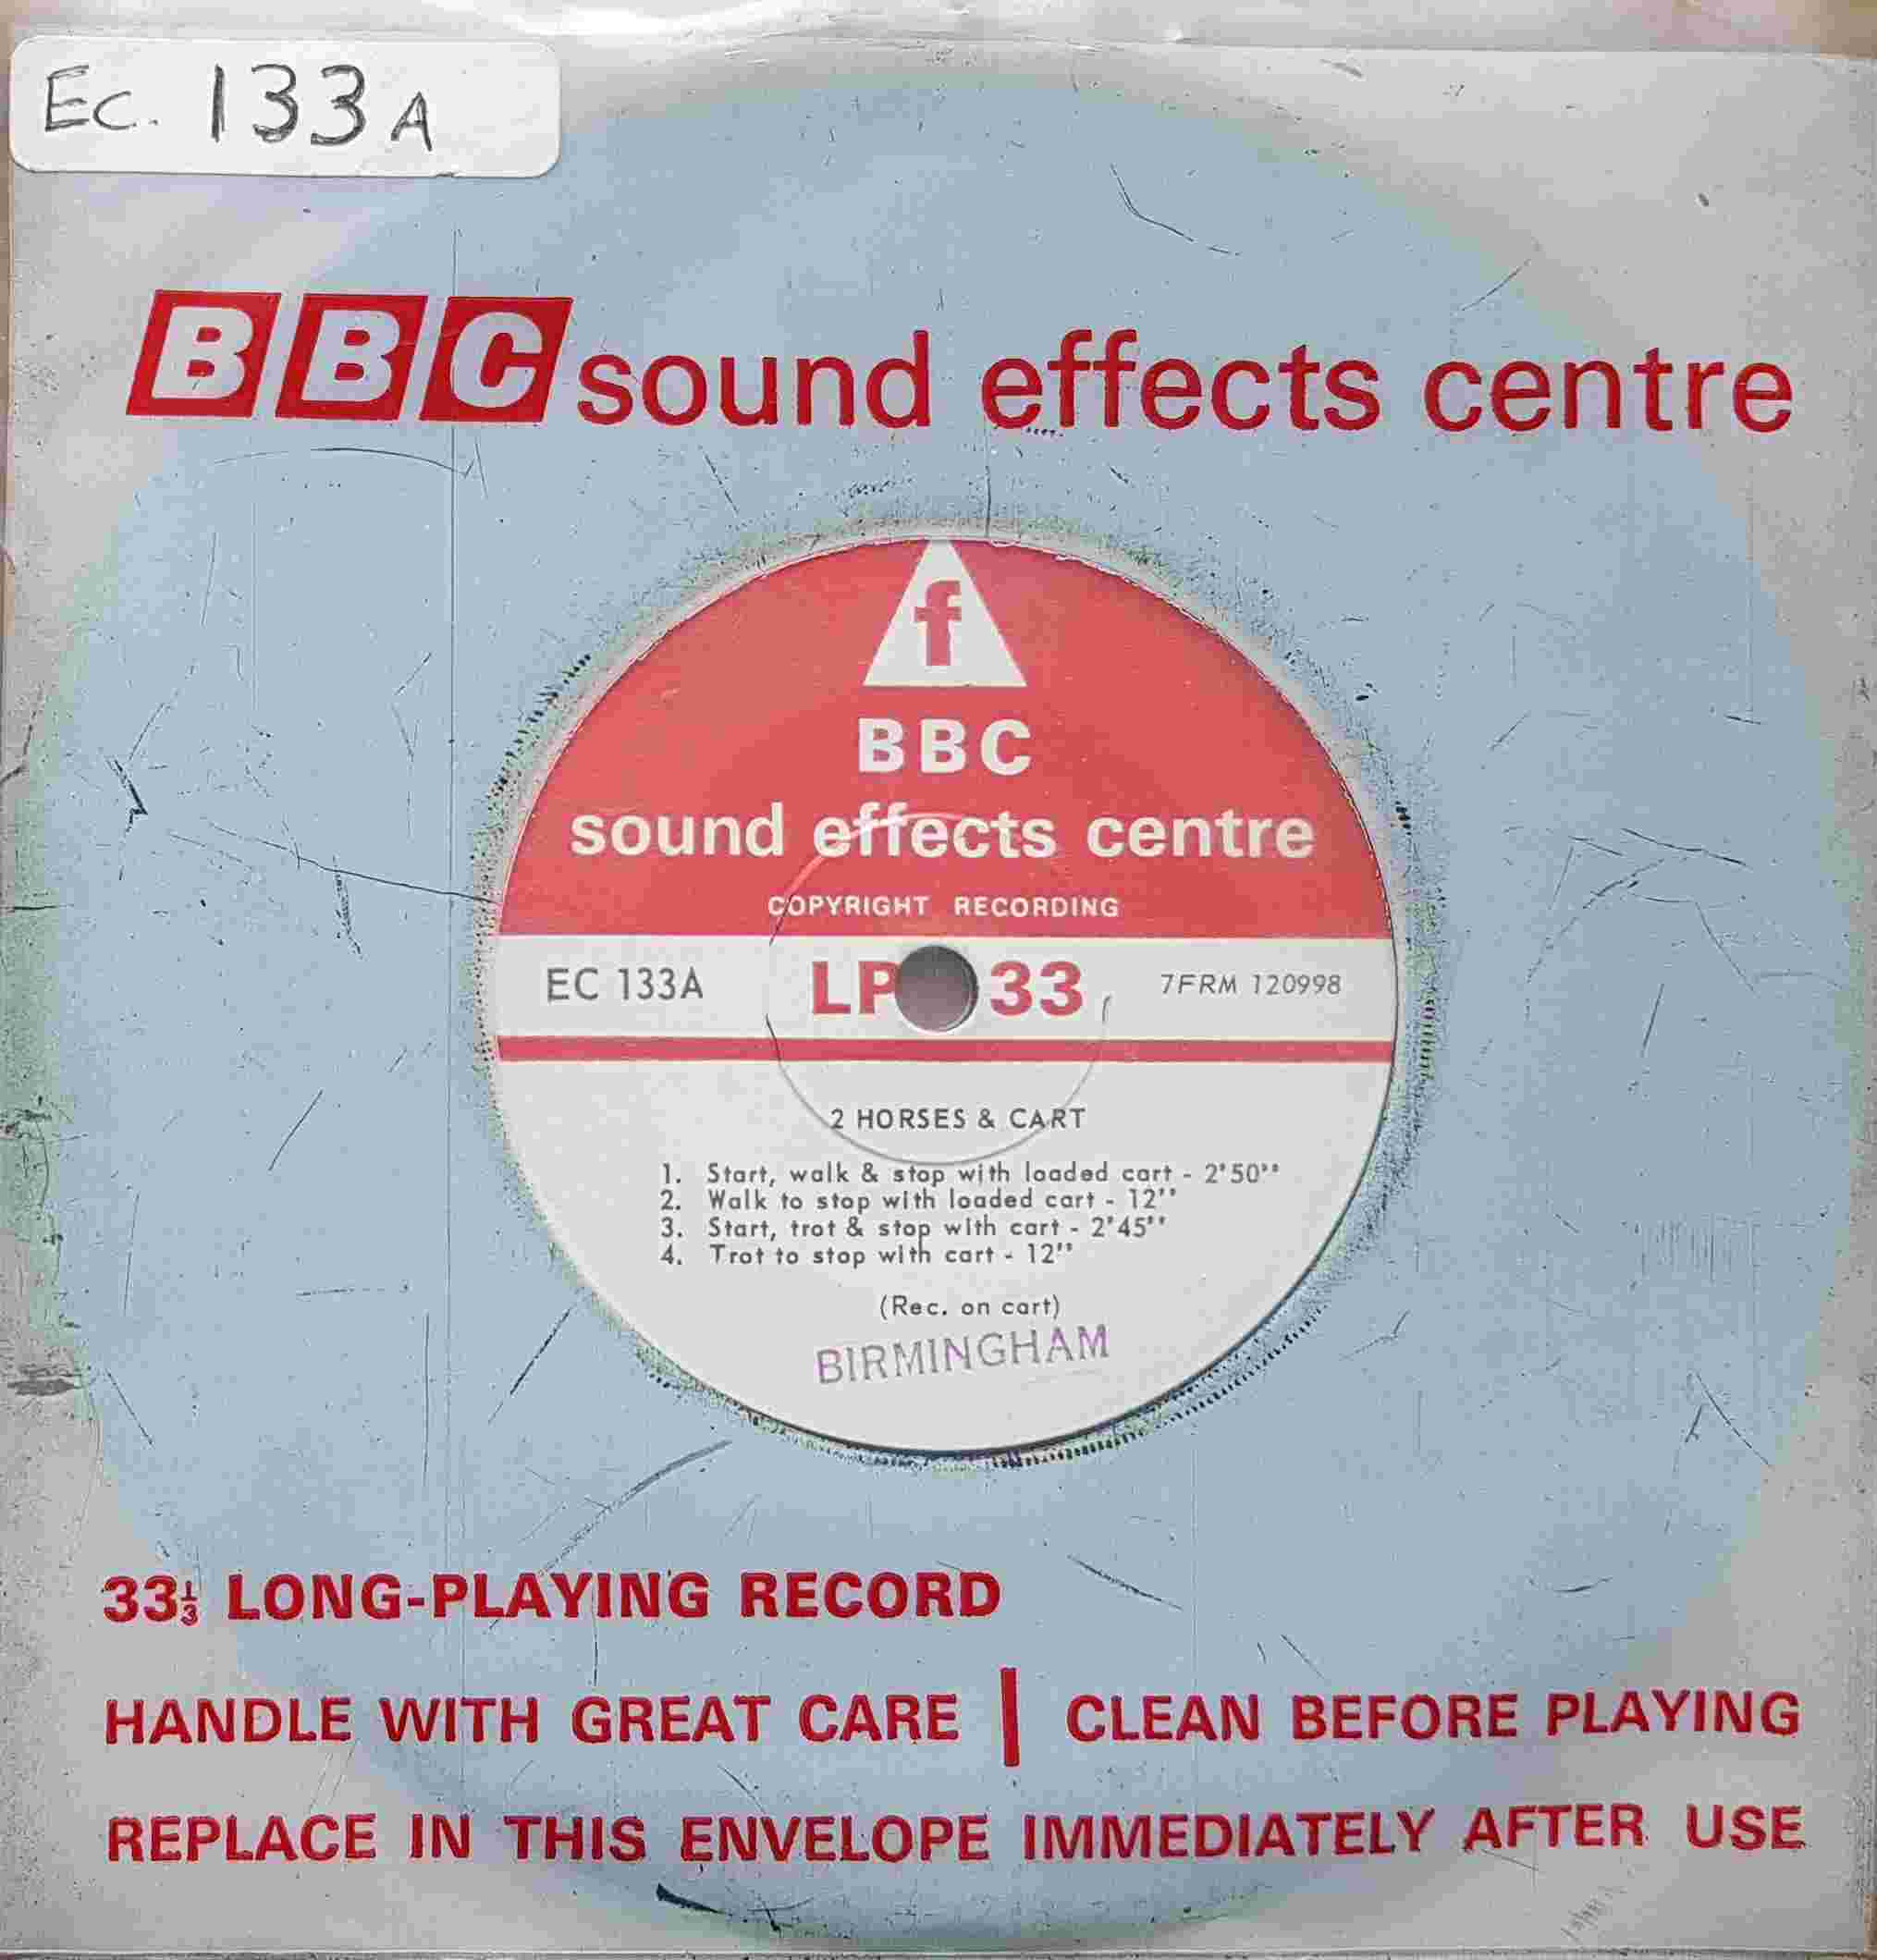 Picture of EC 133A Horses & cart (Recorded on cart) by artist Not registered from the BBC records and Tapes library